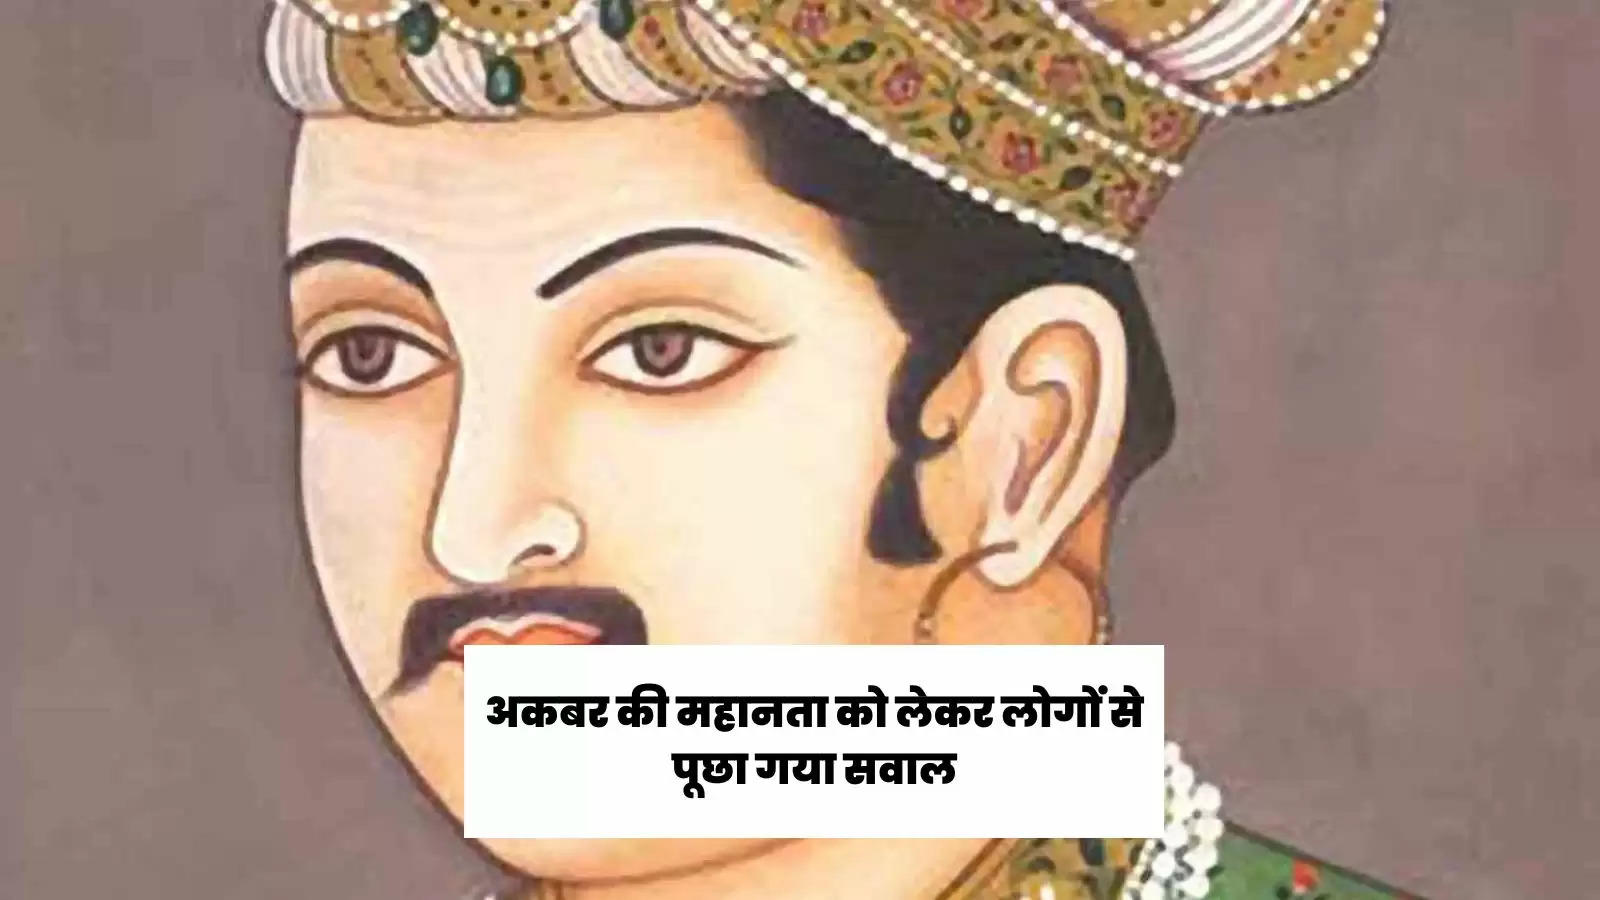 viral-was-akbar-really-great-as-mentioned-in-school-books-people-answer-